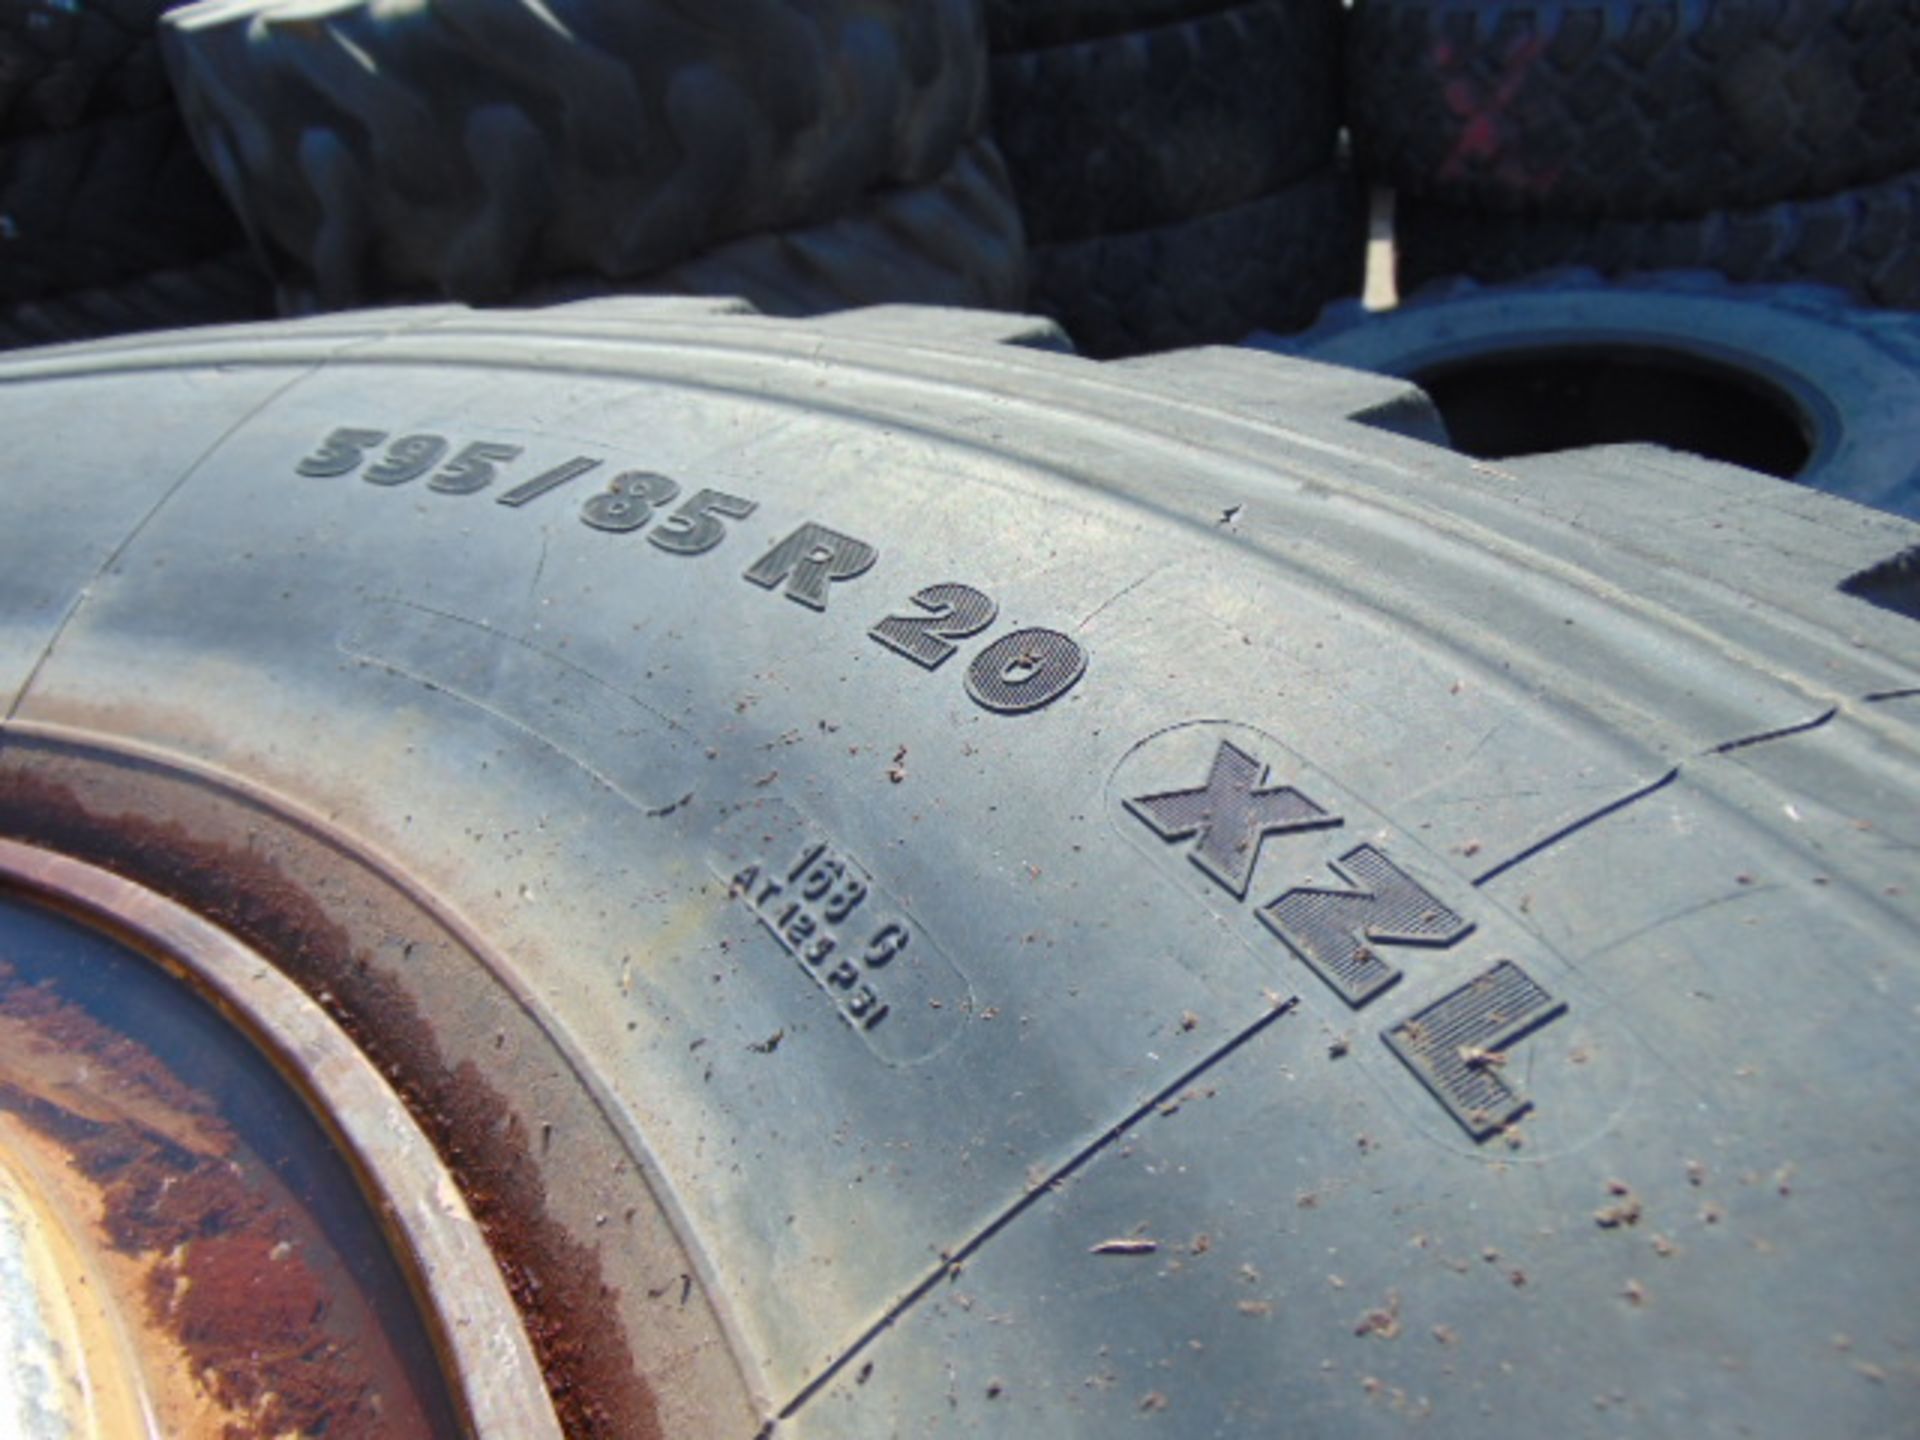 3 x Michelin XZL 395/85 R20 Tyres on 10 Stud Rims - Image 7 of 7